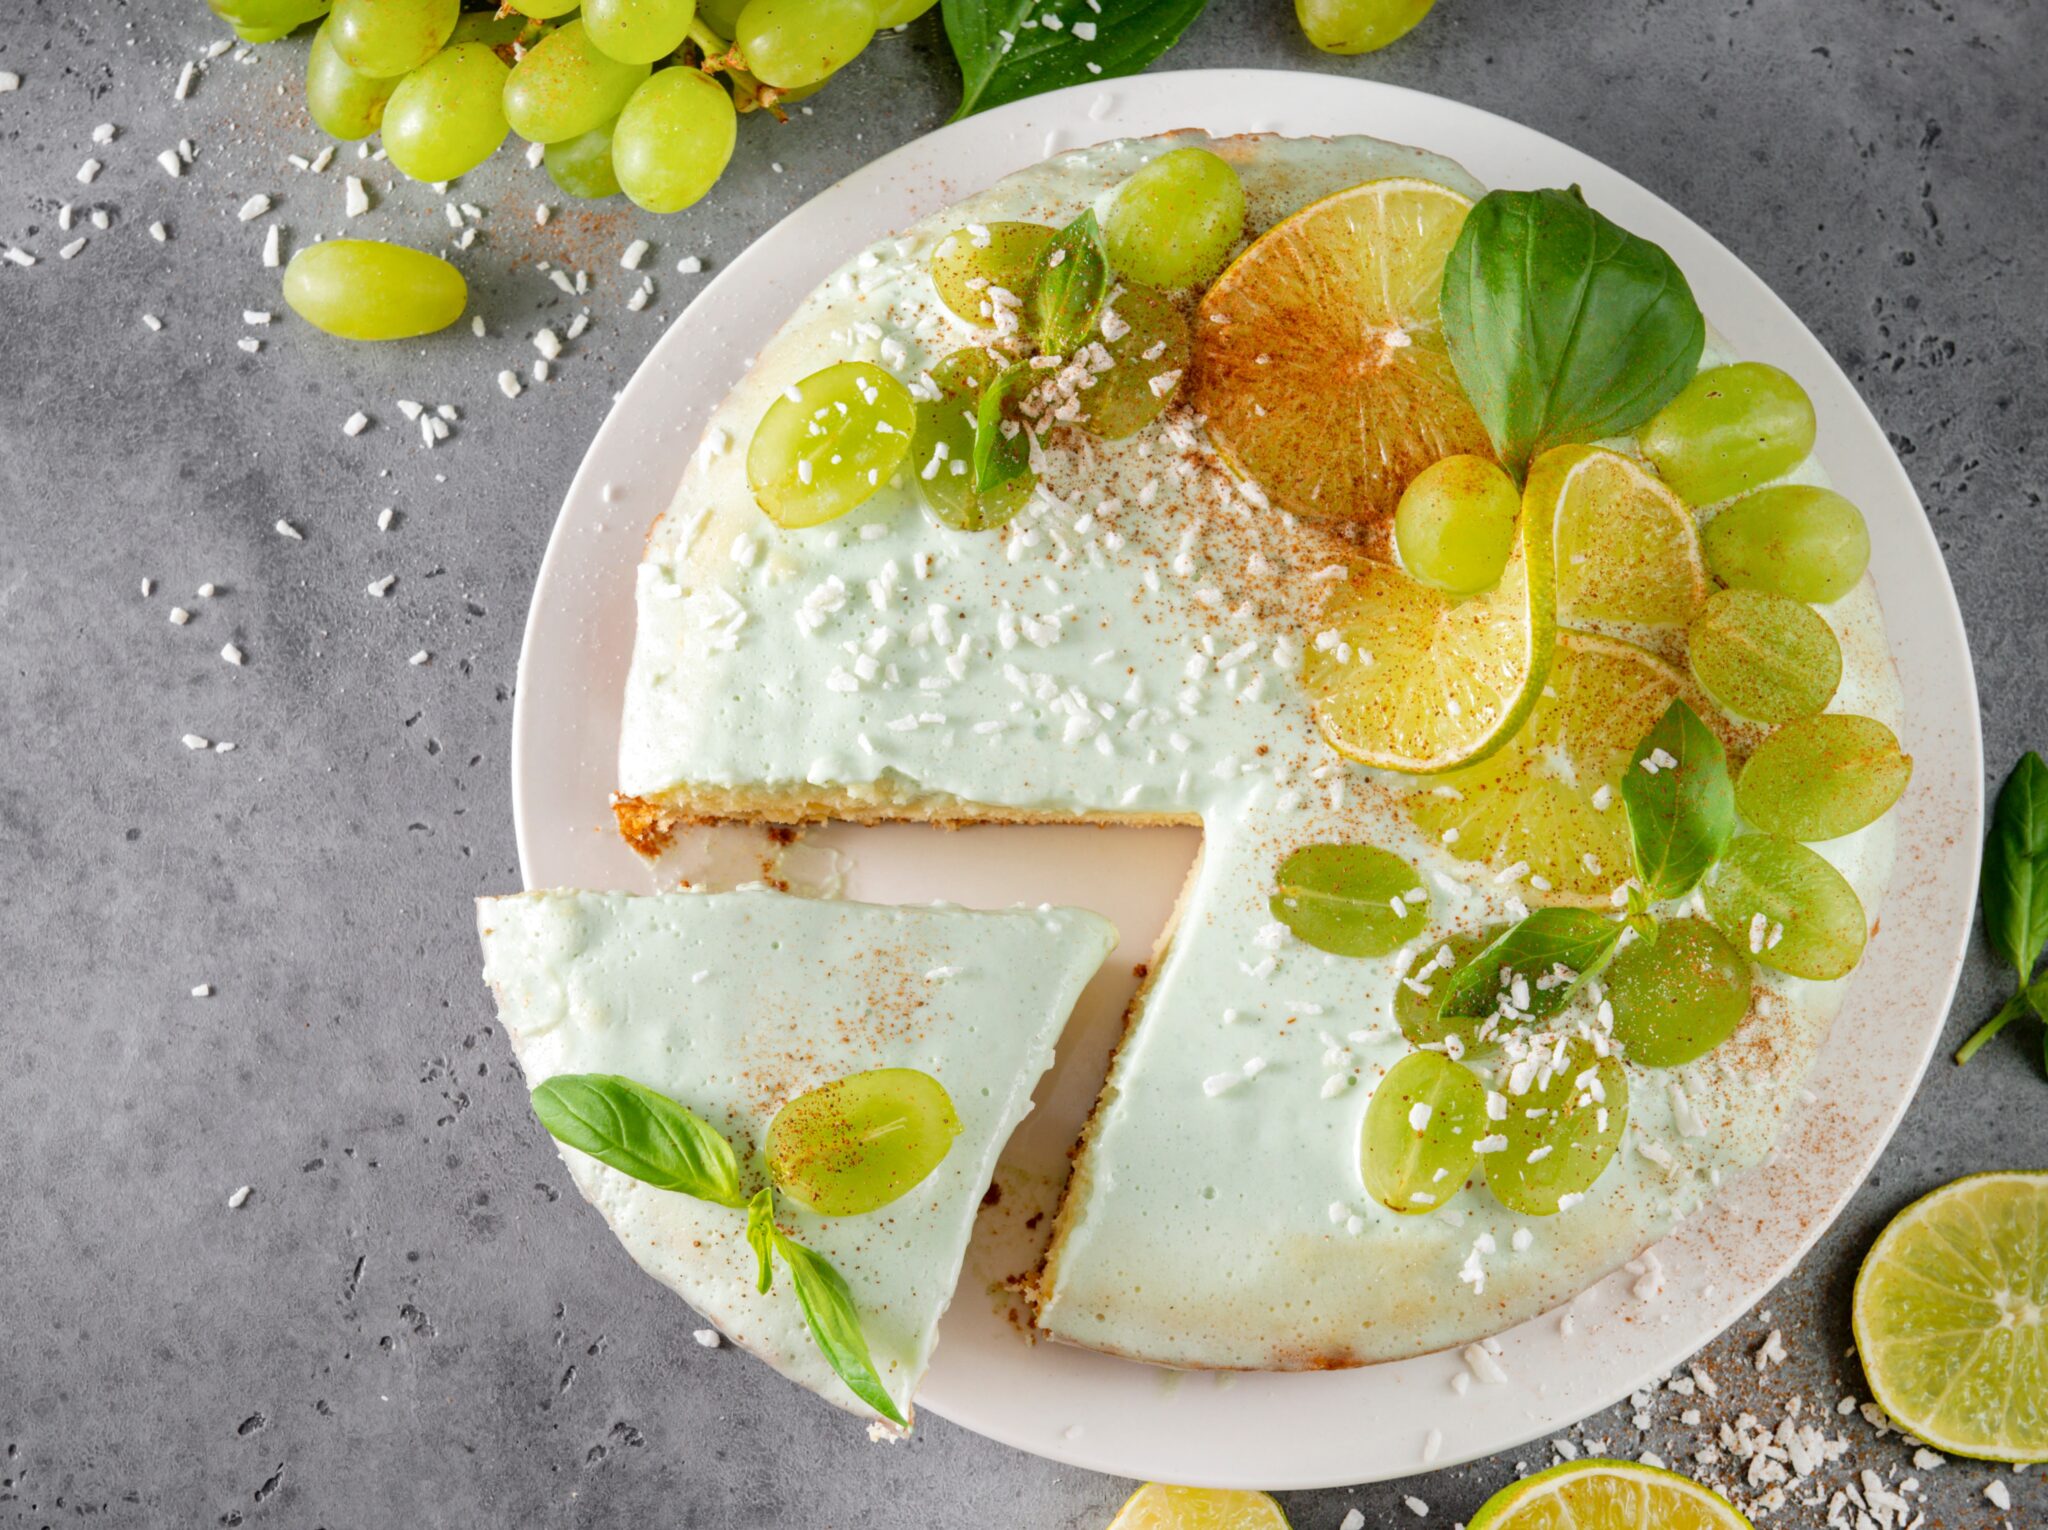 Homemade,Cake,,Pie,With,Grapes,,Lime,Slices,,Coconut,Shavings,,Green